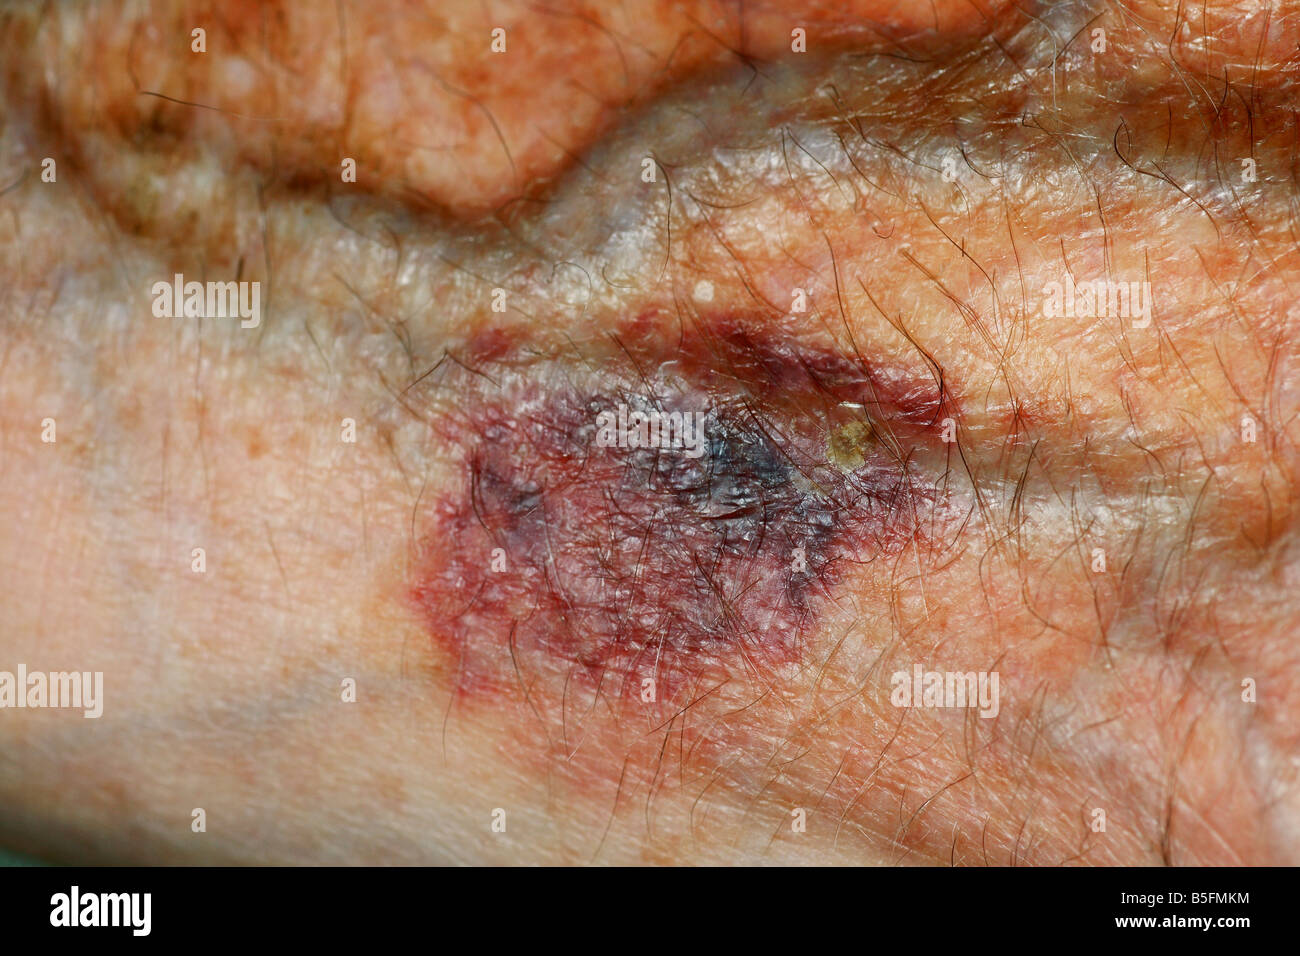 skin thinning and bruising on an old man's hand Stock Photo